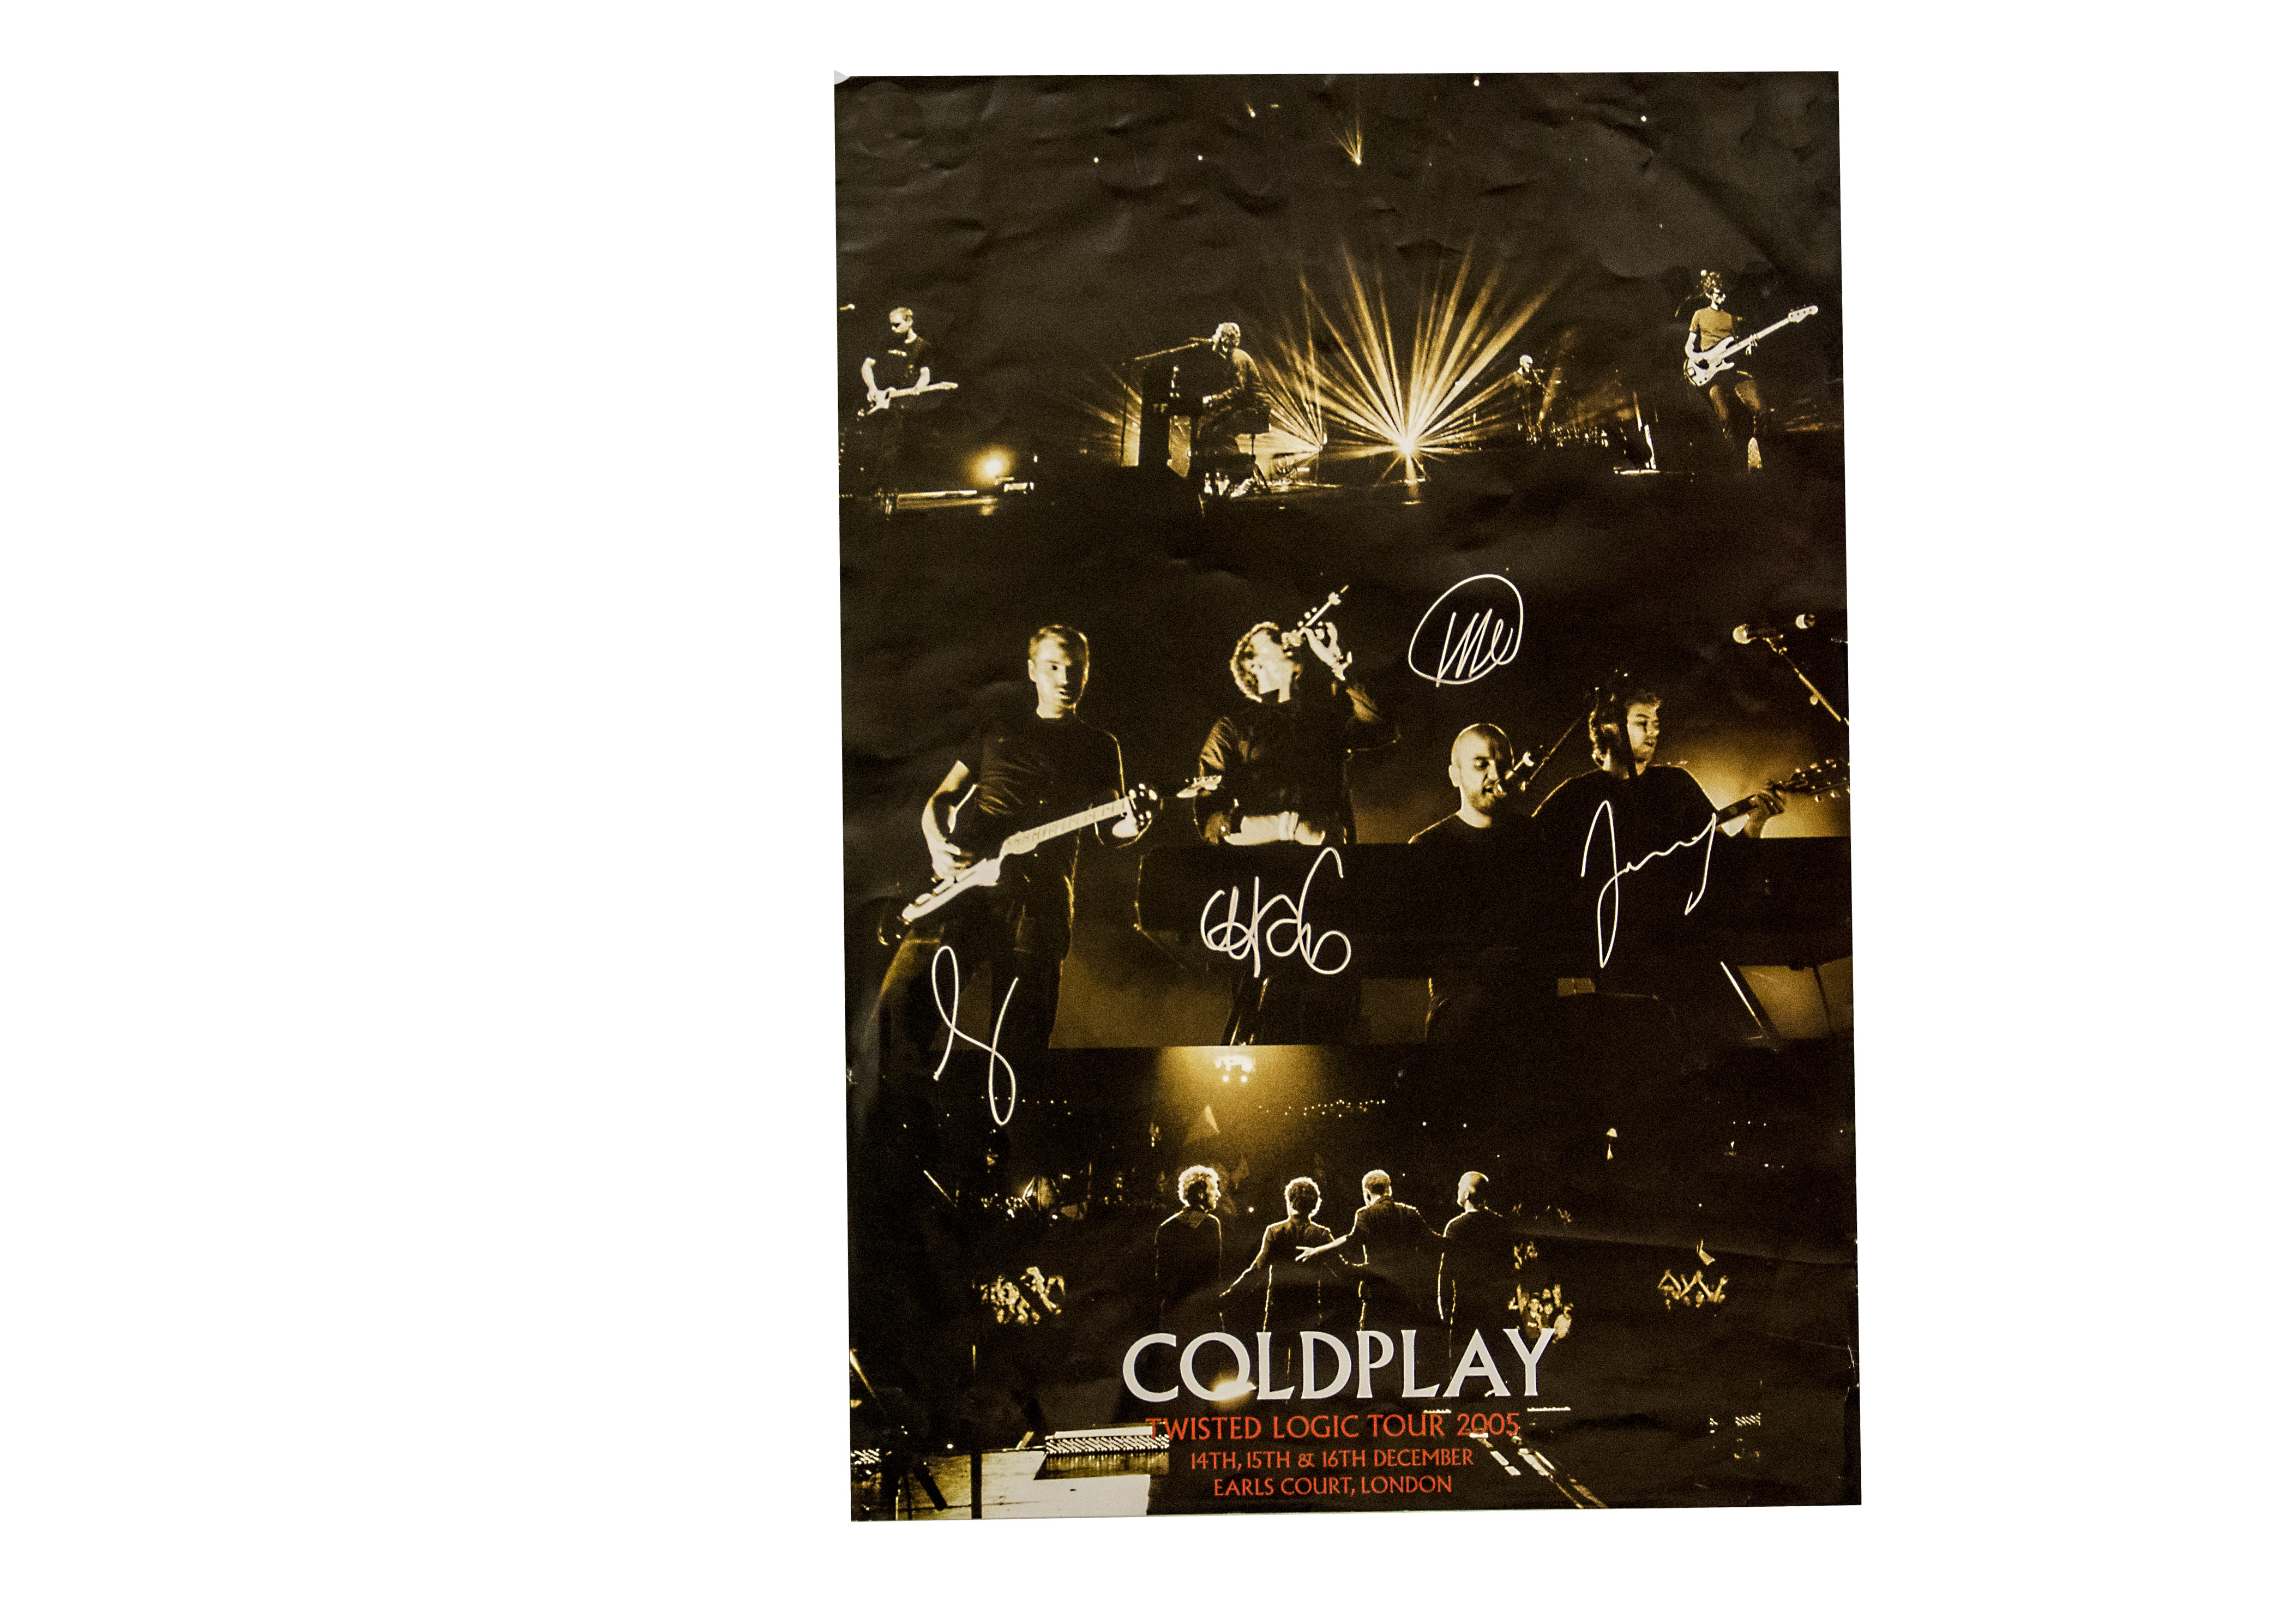 Coldplay, Twisted Logic Tour poster Earls Court 14,15,16 December 2005 with four signatures 42cm x